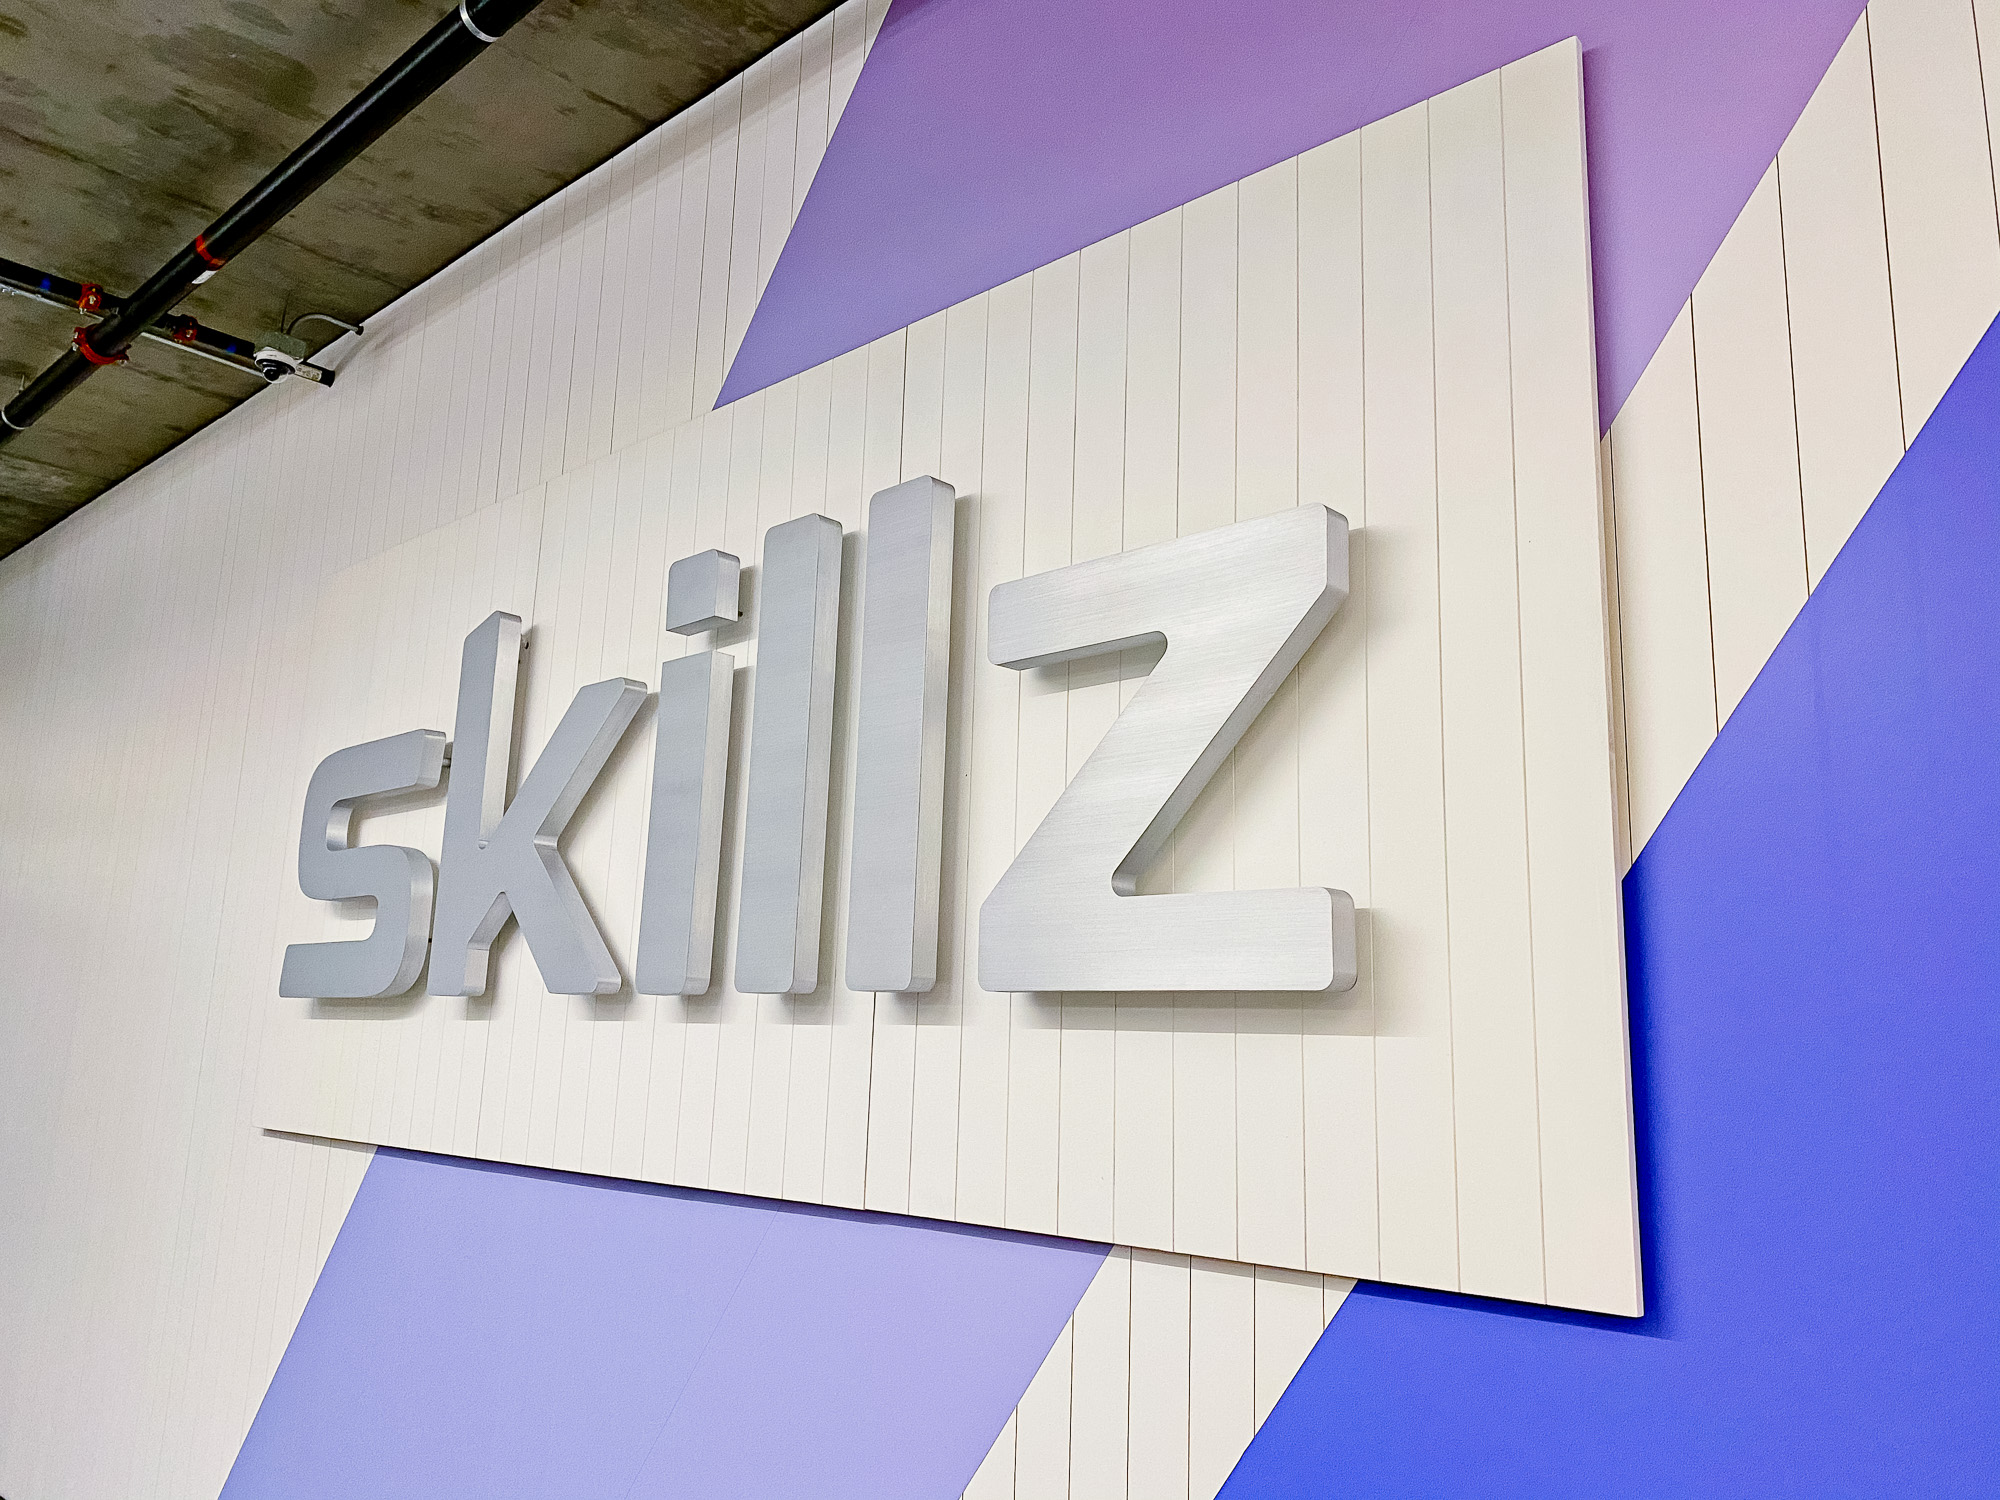 Illuminated metal sign for the reception desk at the San Francisco office of Skillz, an online mobile multiplayer competition platform.